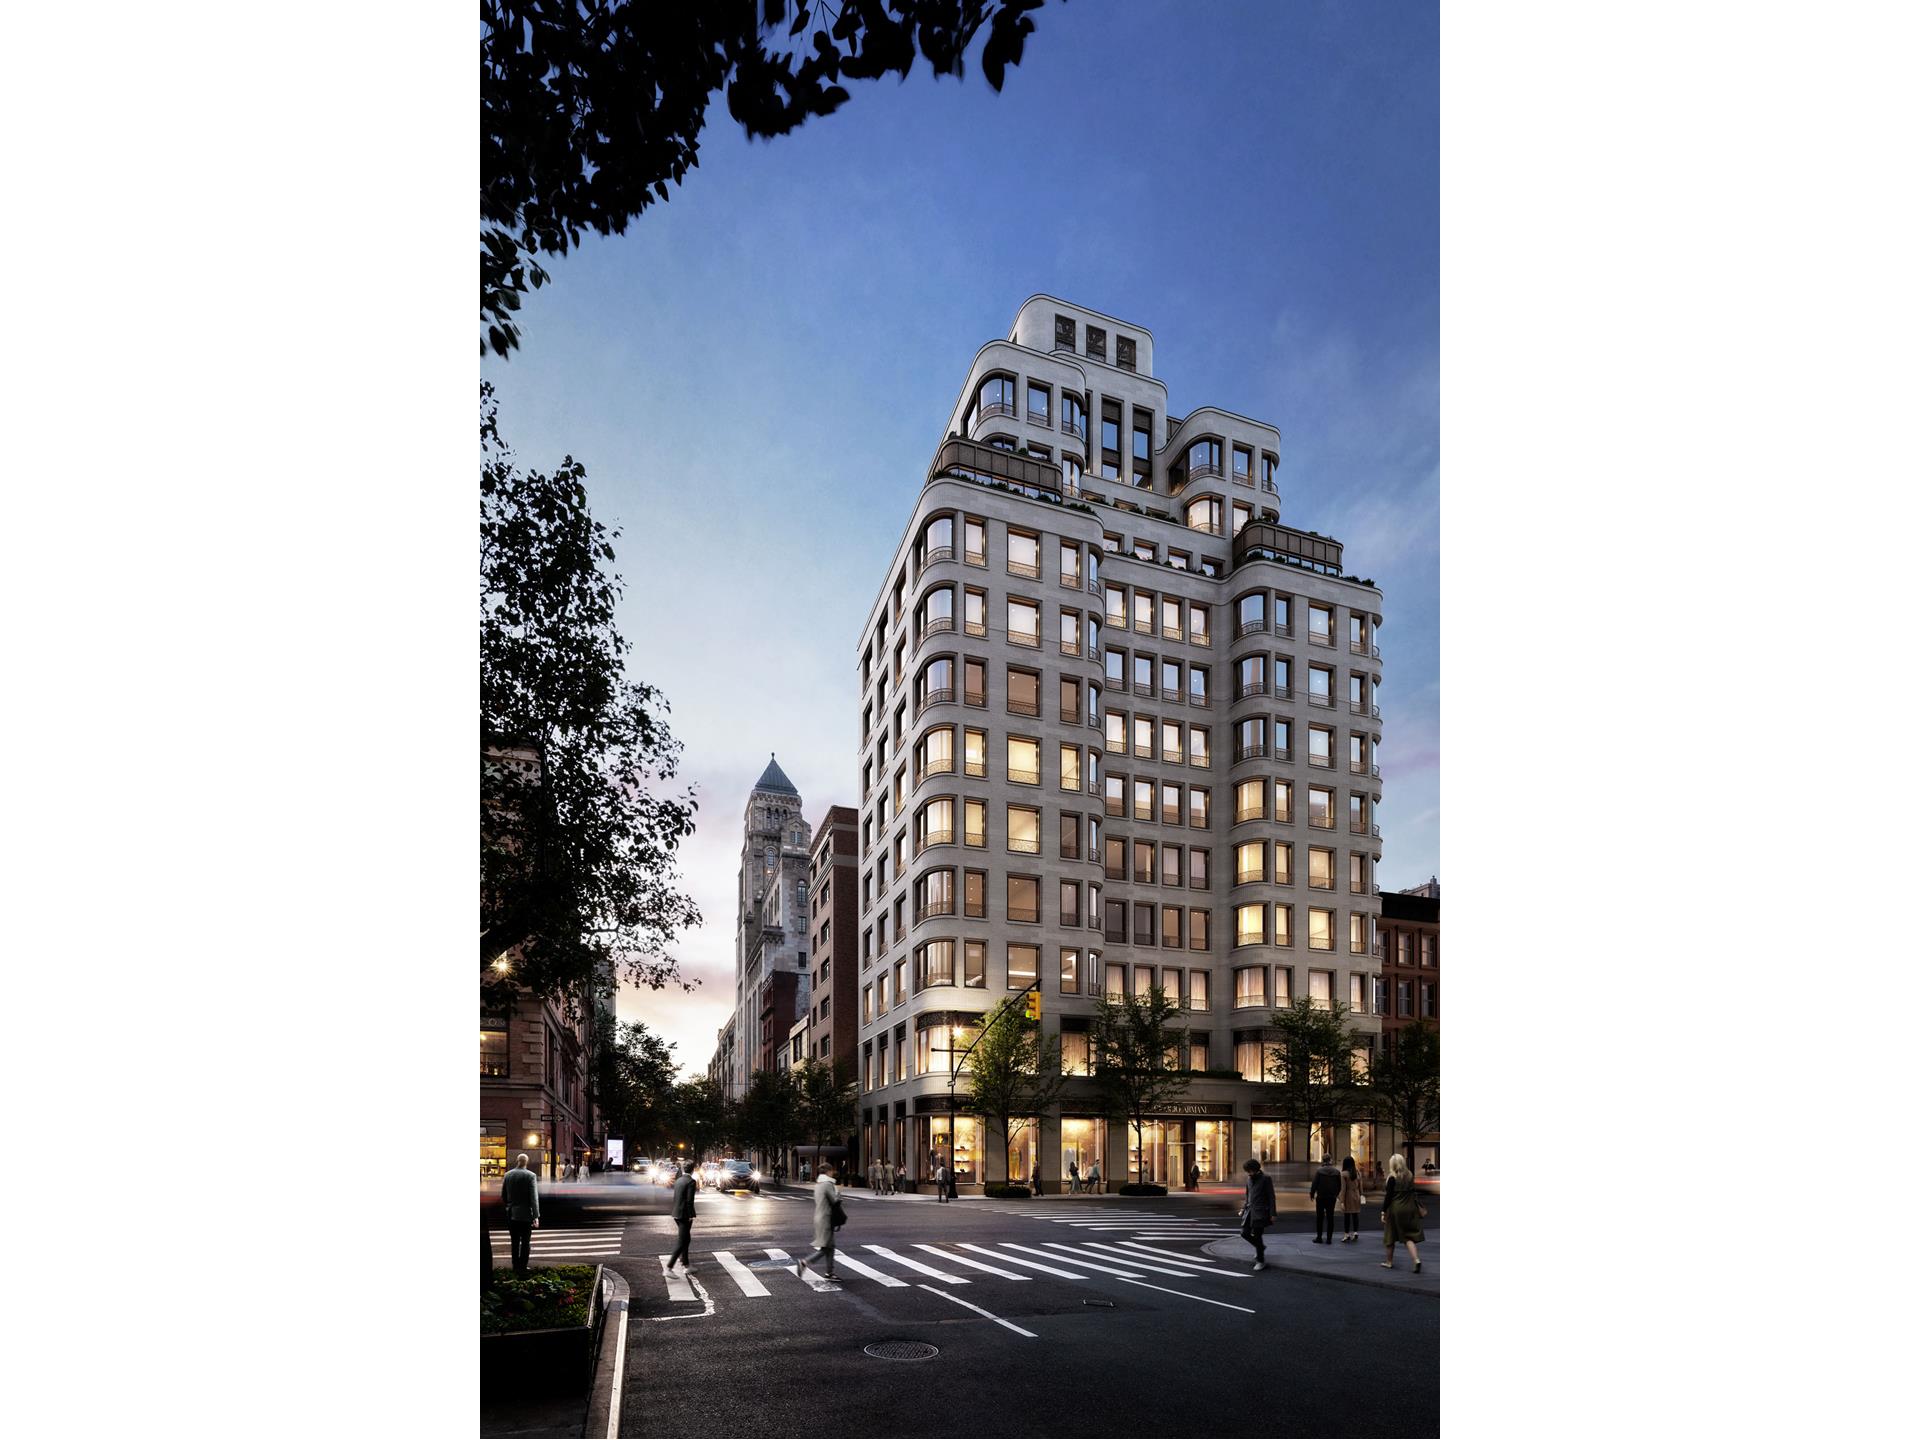 760 Madison Avenue 7, Lenox Hill, Upper East Side, NYC - 5 Bedrooms  
5.5 Bathrooms  
8 Rooms - 